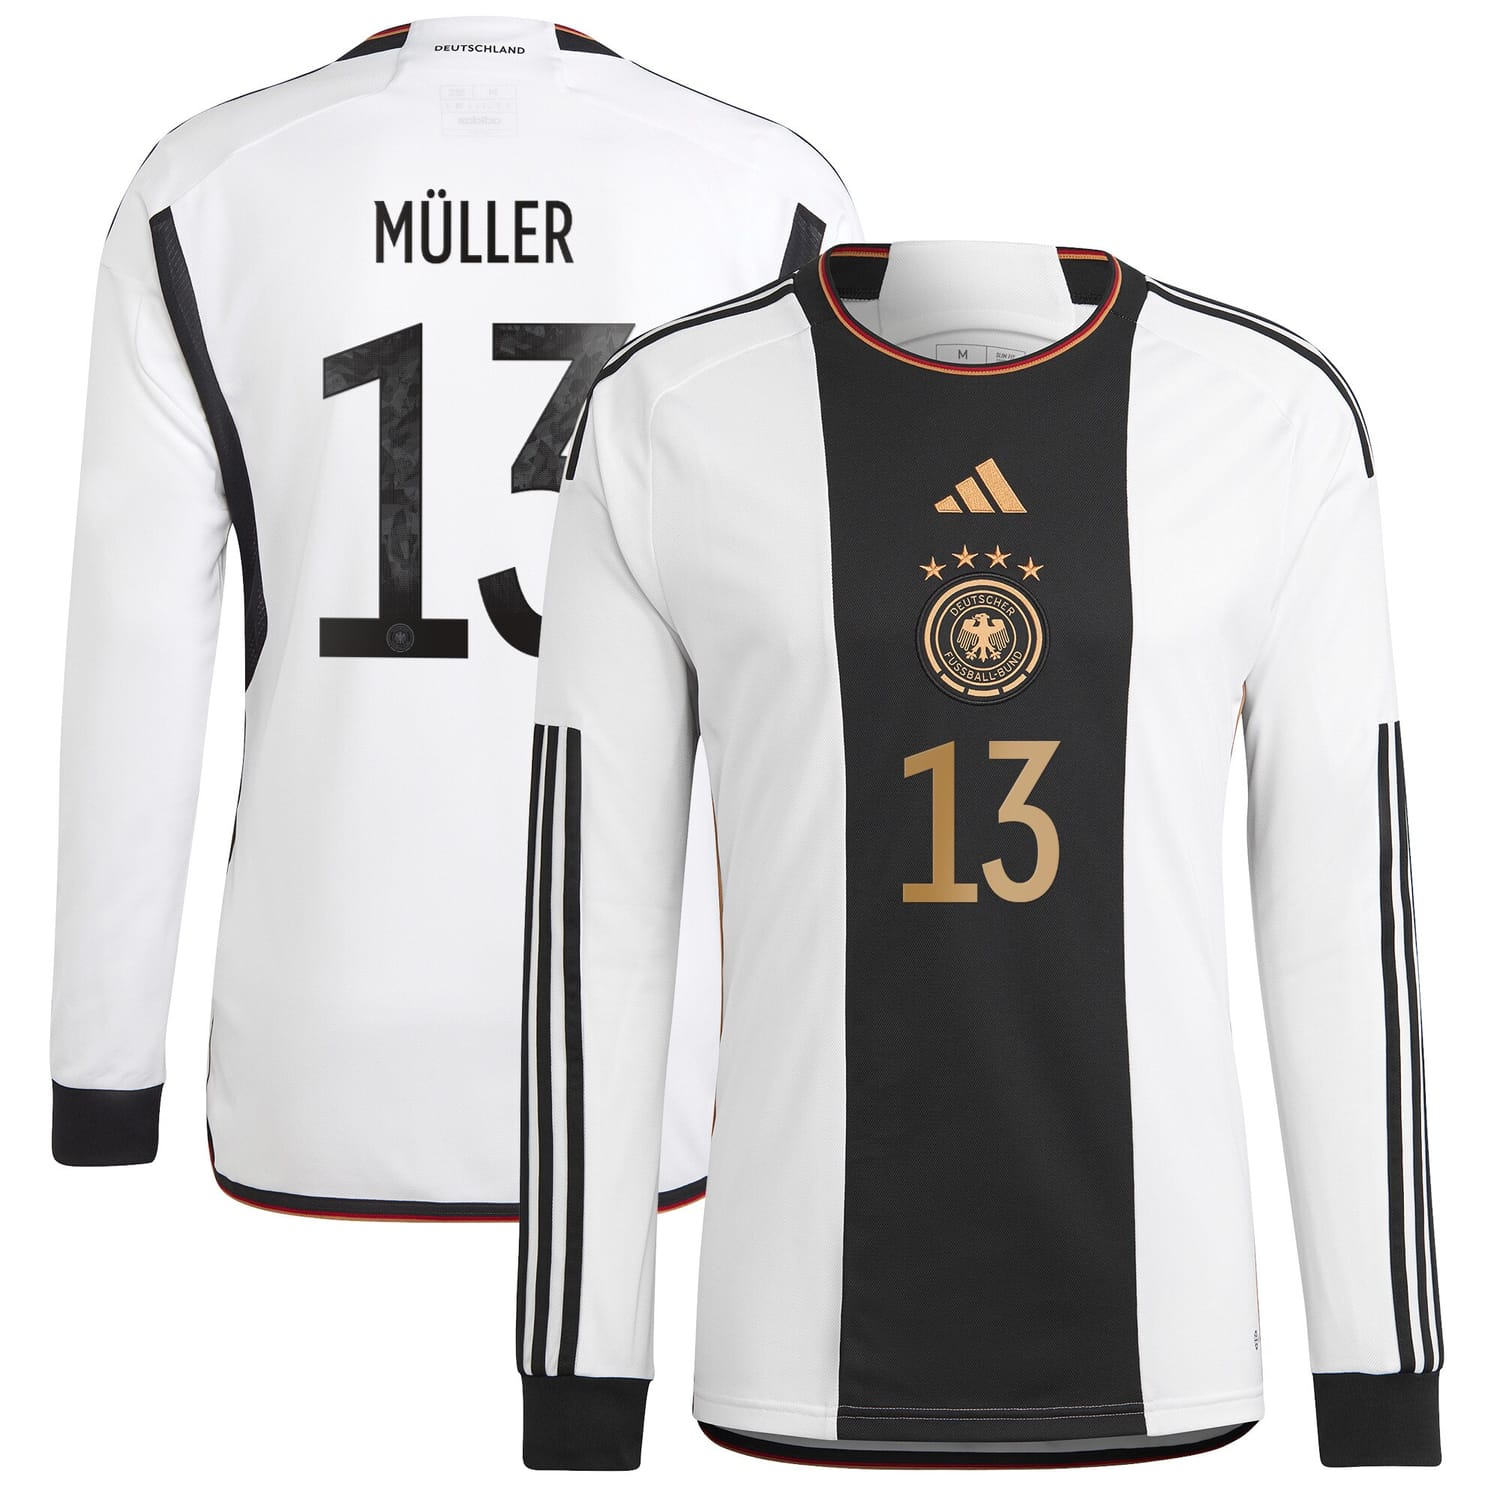 Germany National Team Home Jersey Shirt Long Sleeve player Thomas Müller 13 printing for Men